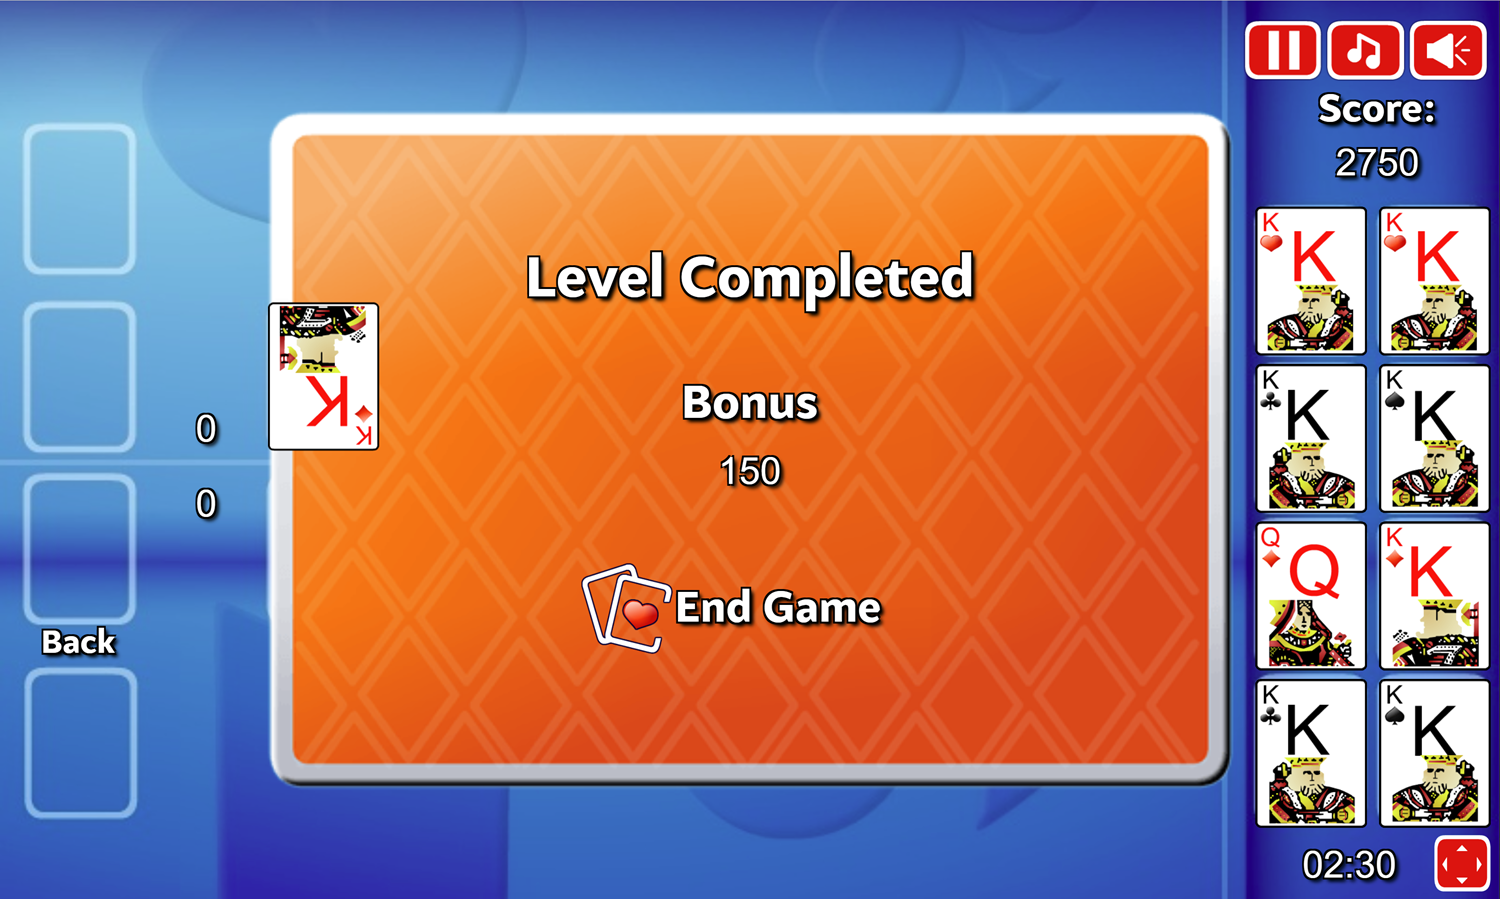 Double Solitaire Game Level Completed Screen Screenshot.